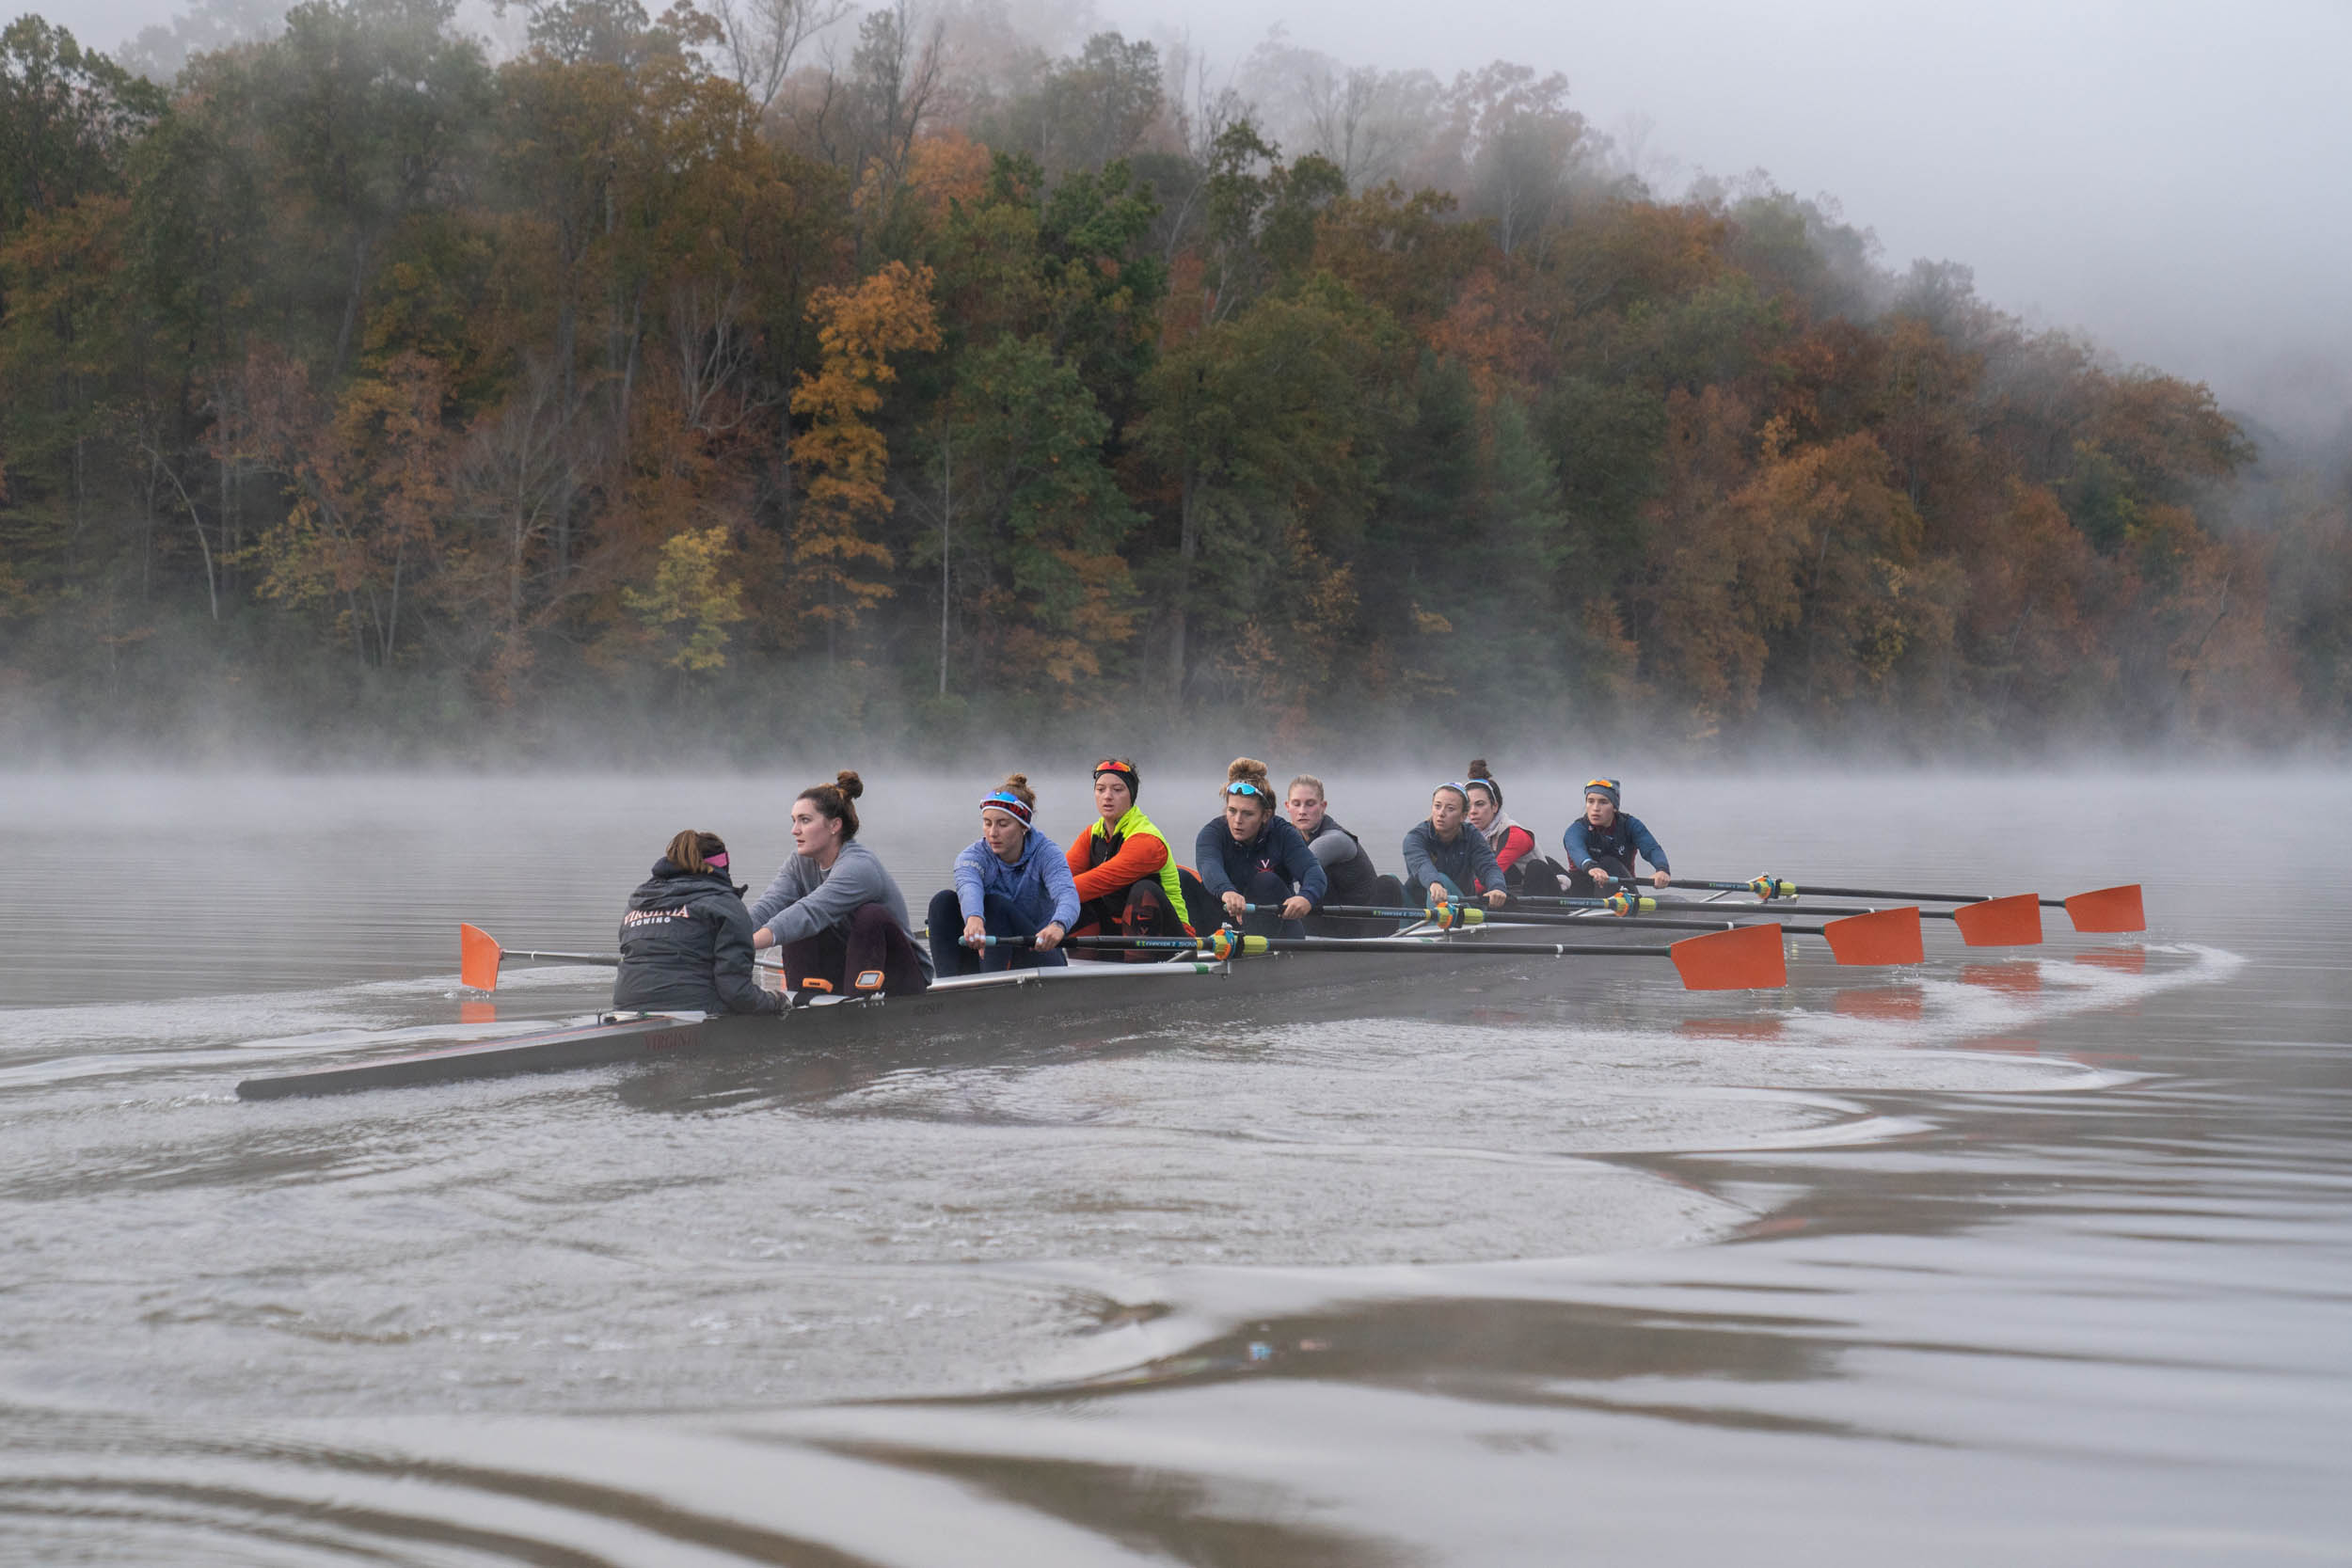 UVA womens rowing team on a foggy river with the bordering trees turning various fall colors